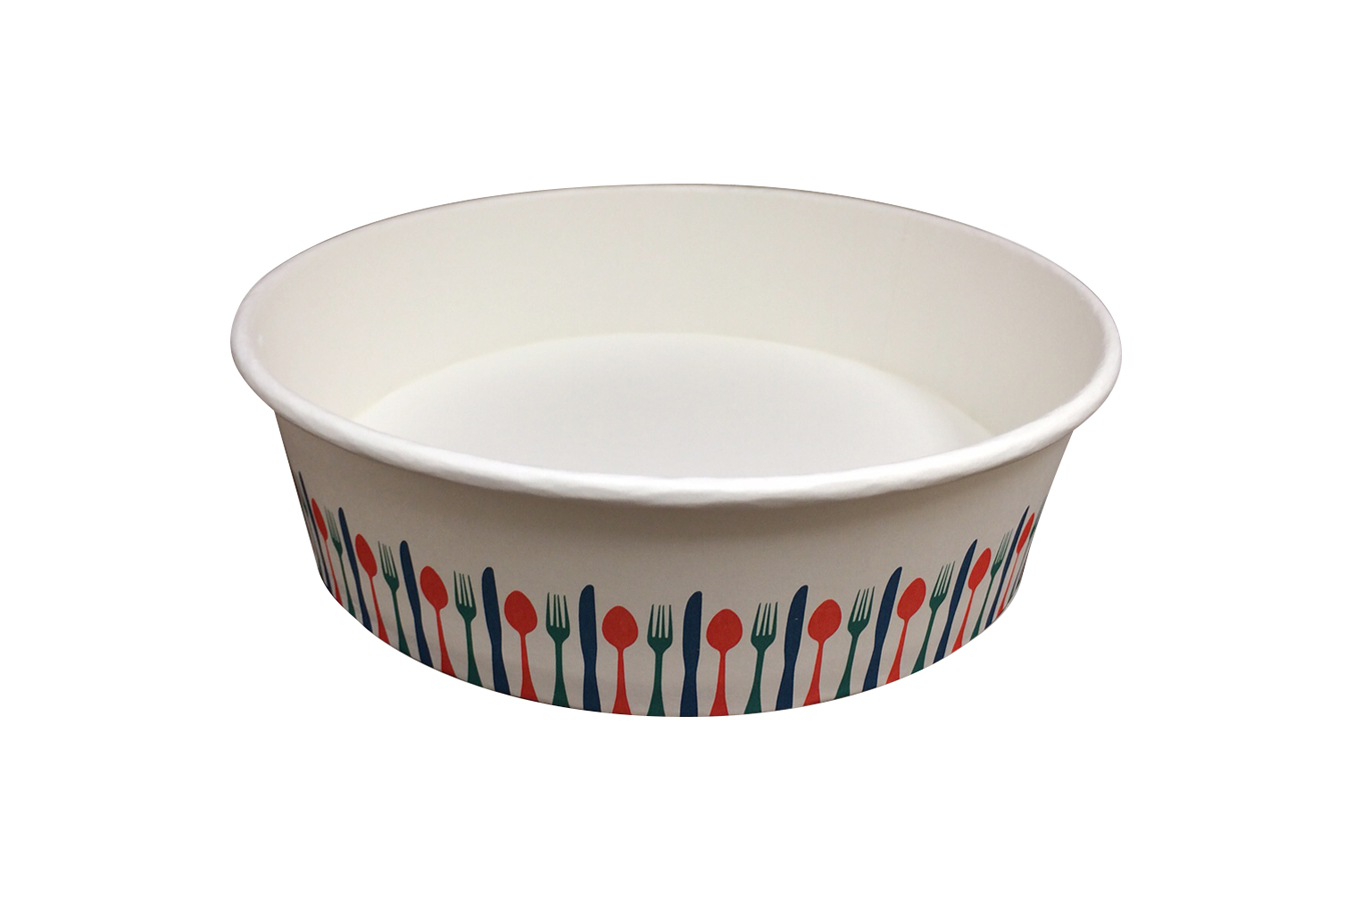 Stock print spoon fork knif color takeout container 32 oz size Athena paper bowl by Ecoapx Inc